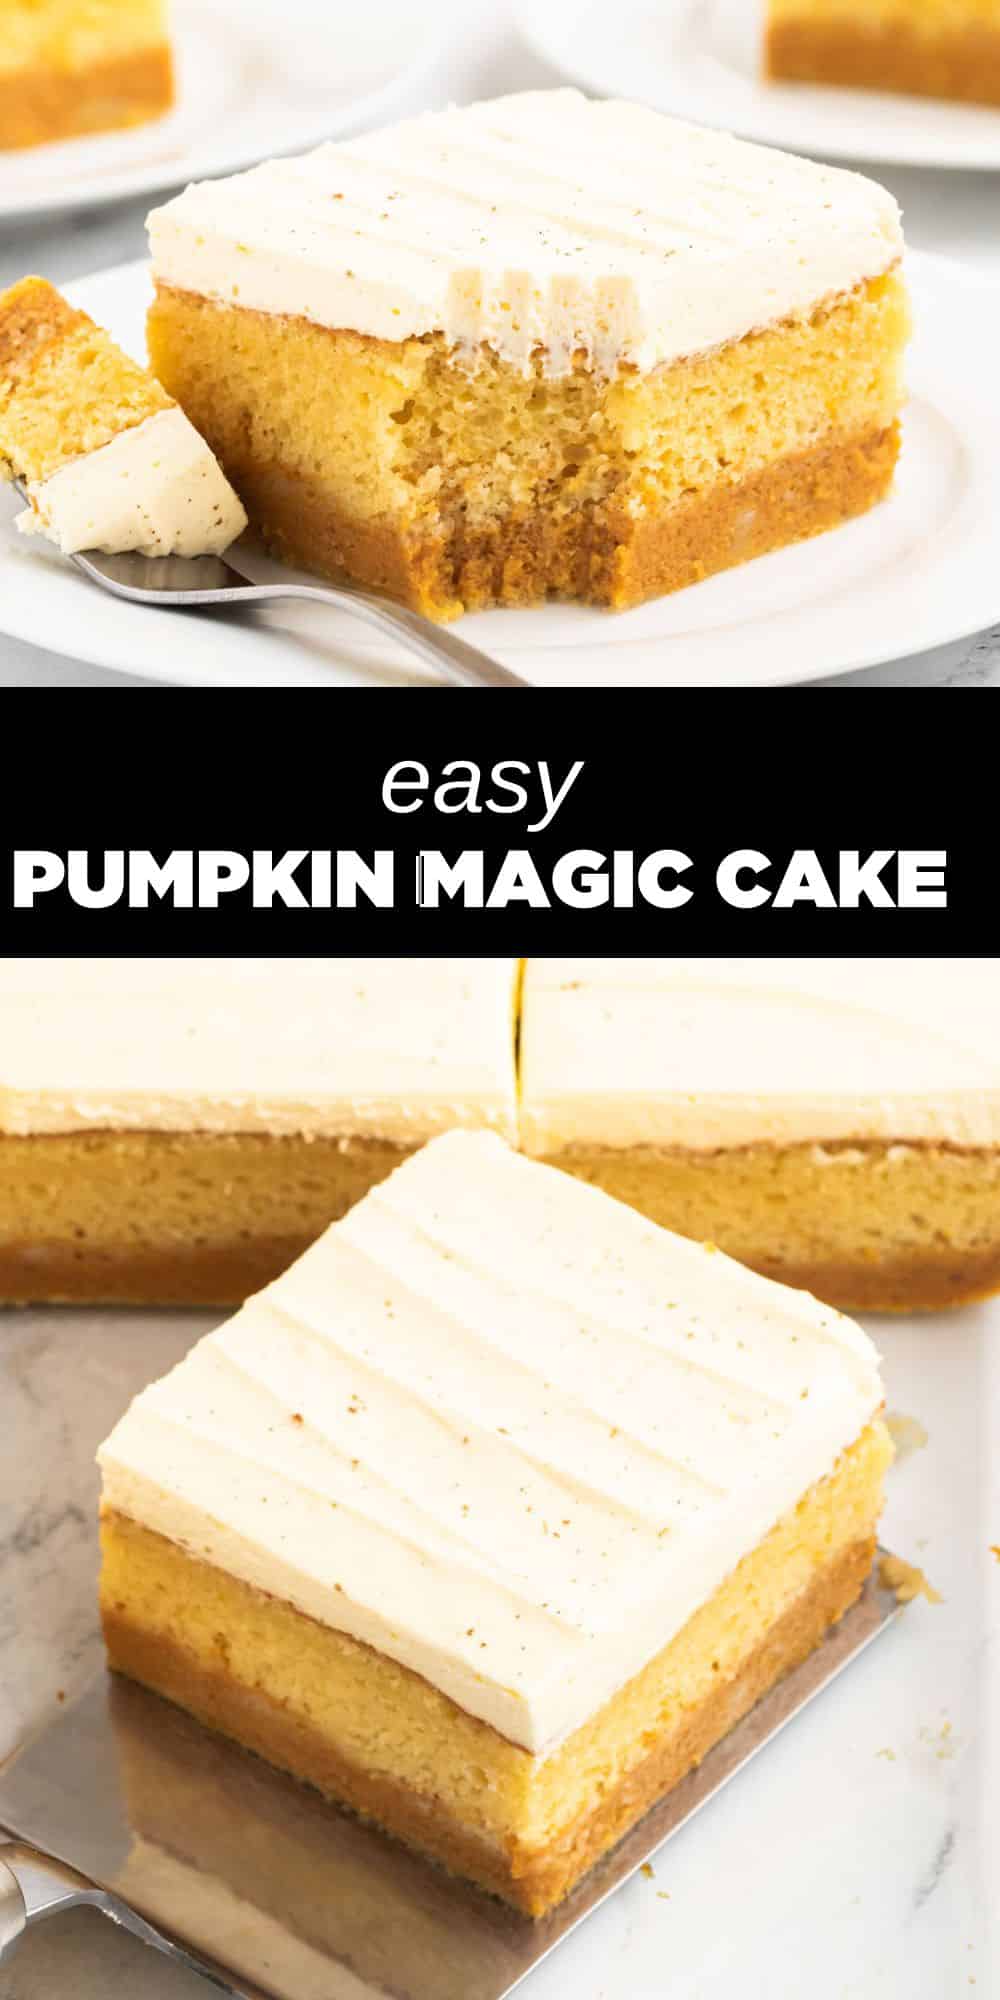 This moist Magic Pumpkin Cake features a creamy pumpkin layer and a fluffy yellow cake layer that magically swaps places as the cake bakes. To complete this amazing fall dessert, it's topped with decadent creamy sweet frosting as the top layer.